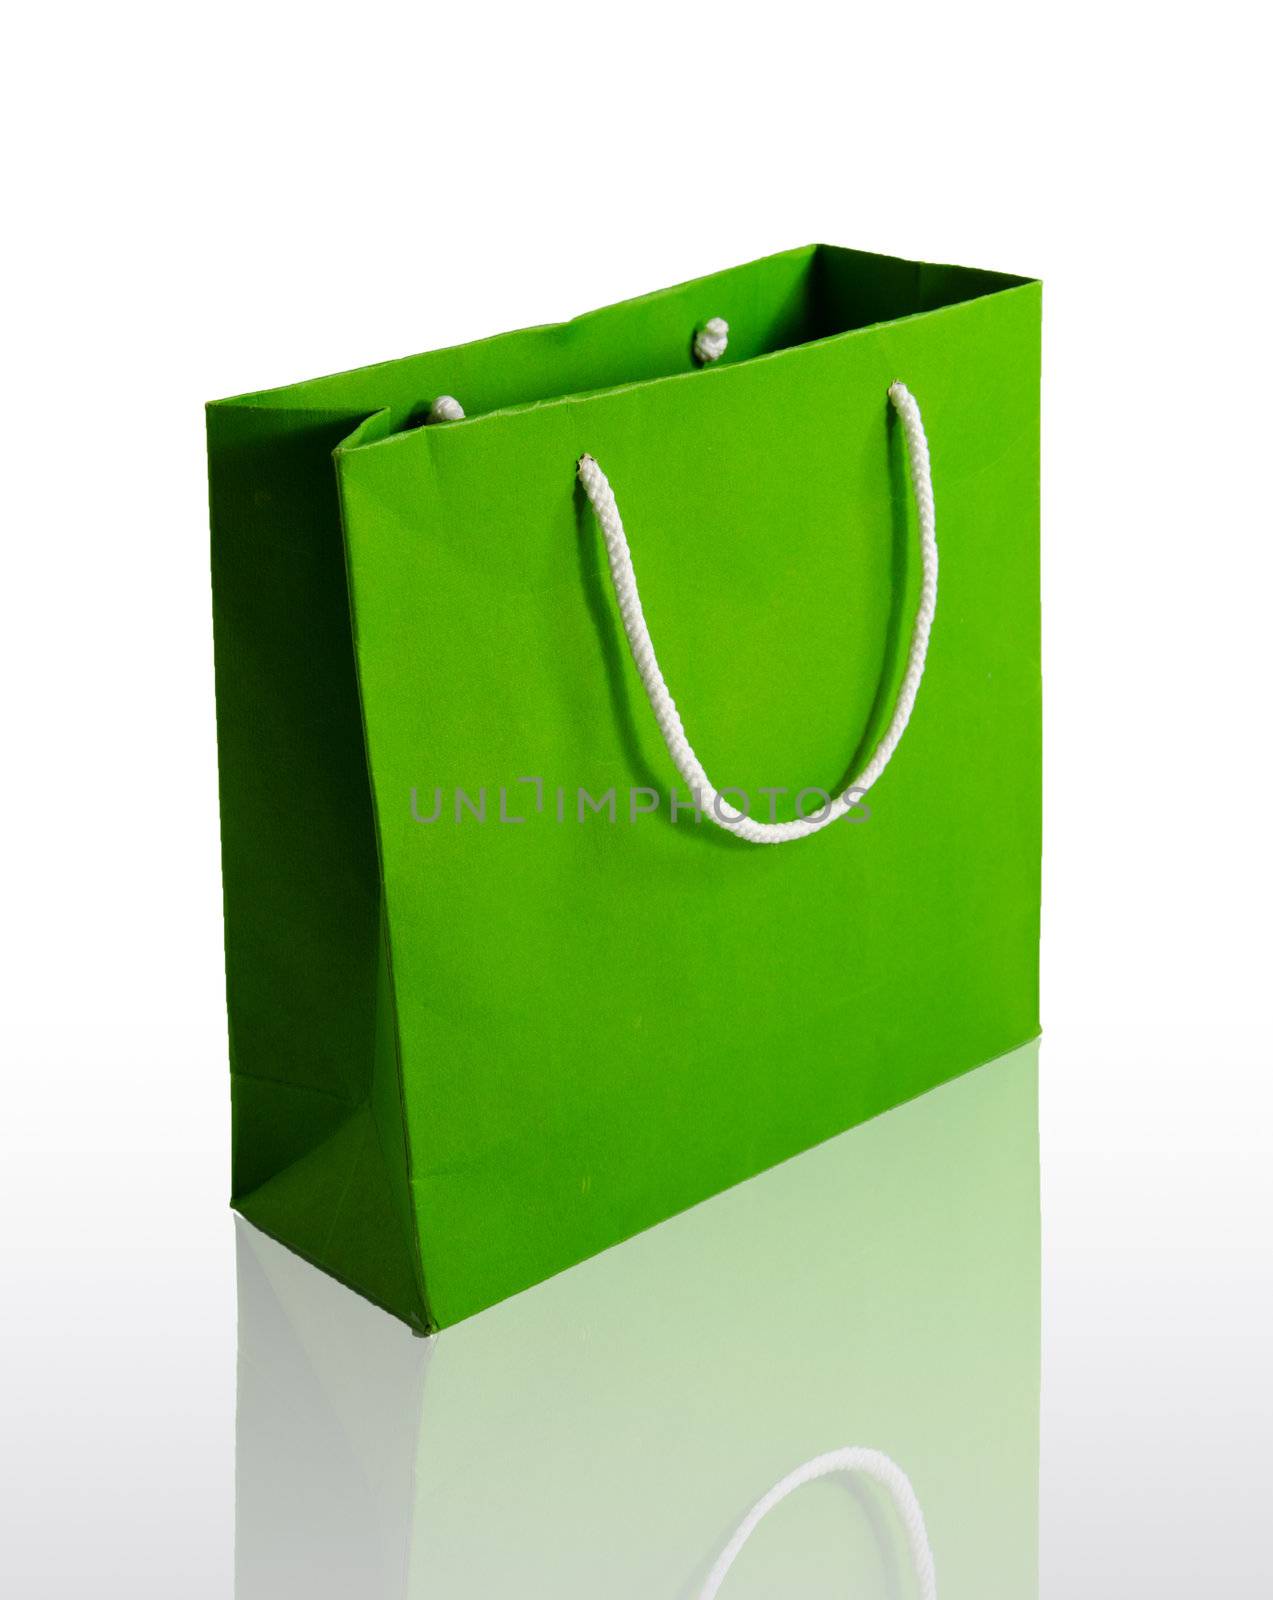 Green paper bag on reflect floor and white background